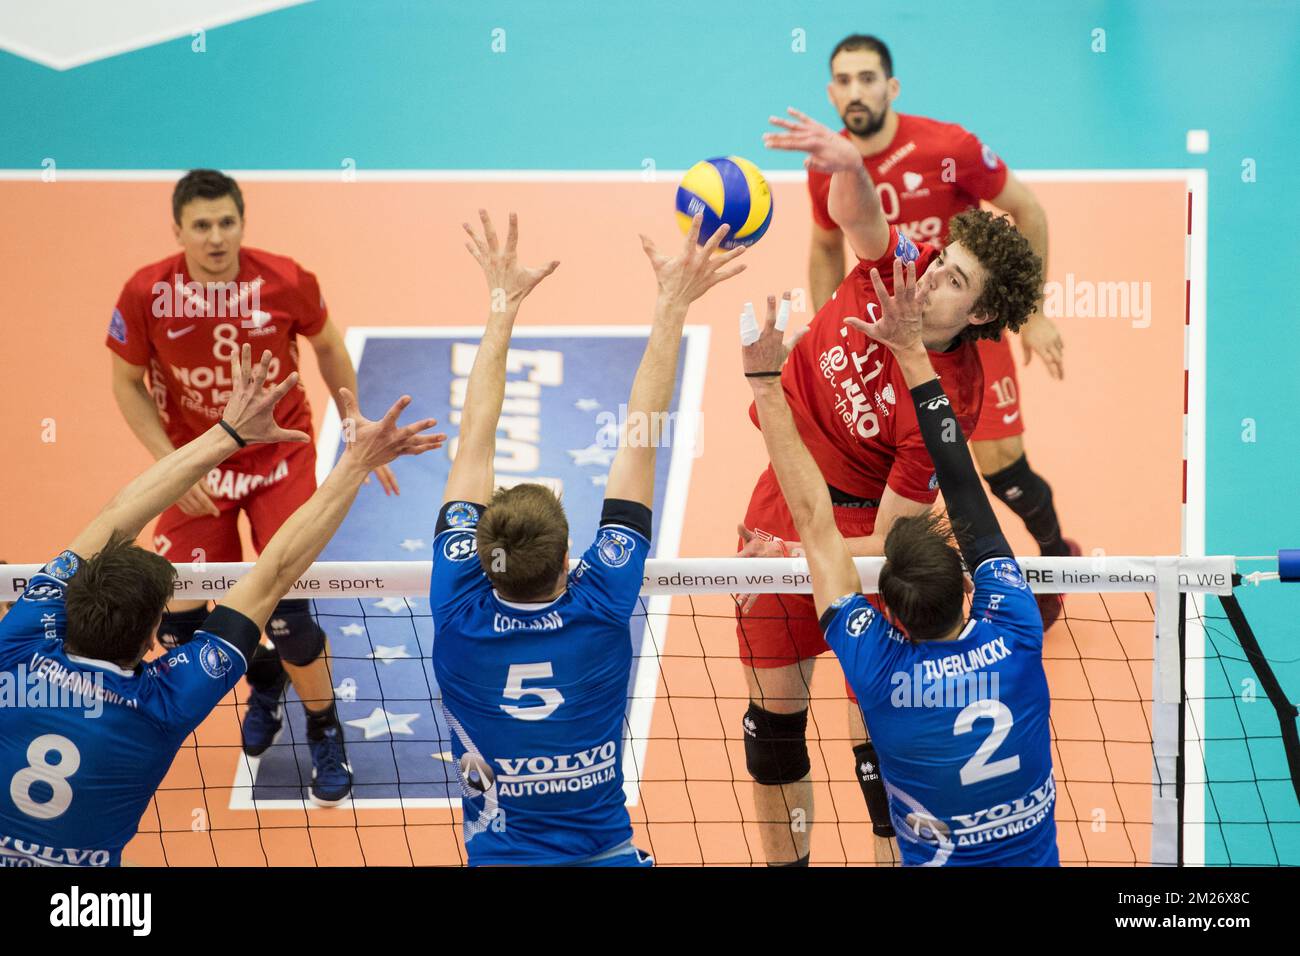 Roeselare's Matthijs Verhanneman, Roeselare's Pieter Coolman, Maaseik's  Kamil Rychlicki and Roeselare's Hendrik Tuerlinckx fight for the ball  during the match between Knack Roeselare and Noliko Maaseik in the Play  Offs of the